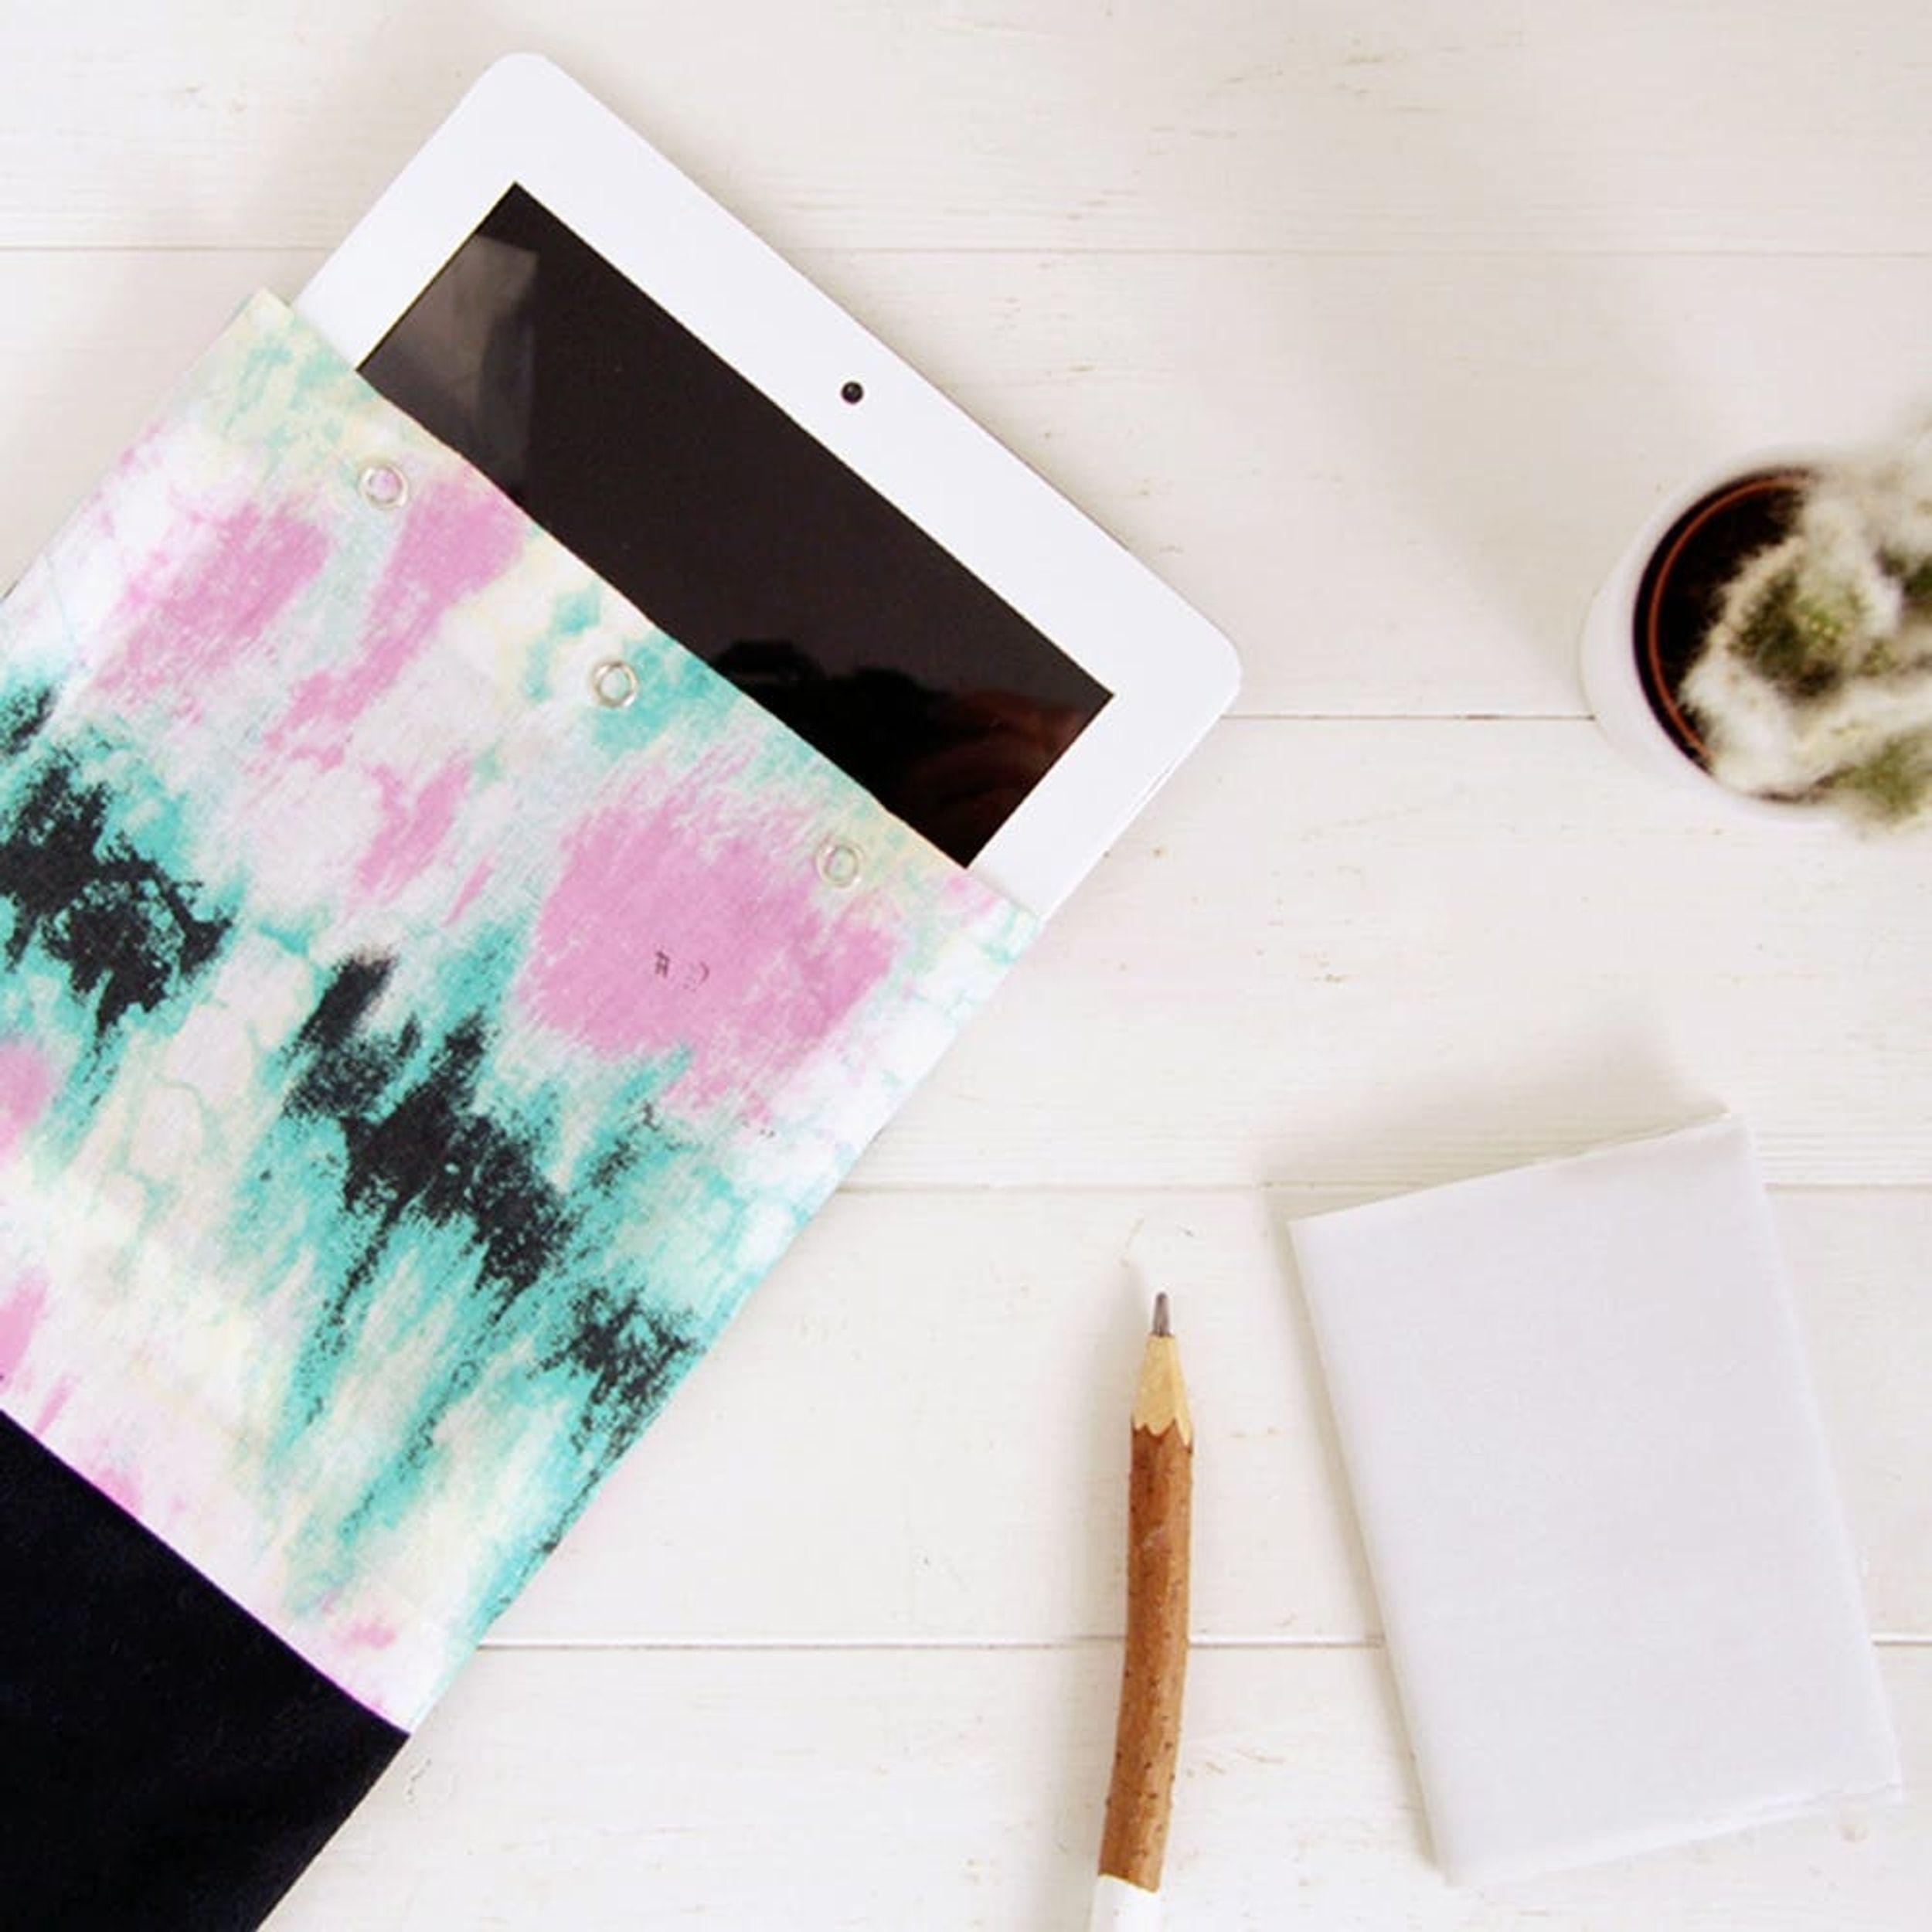 16 Ways to Cover + Protect Your iPad or Kindle